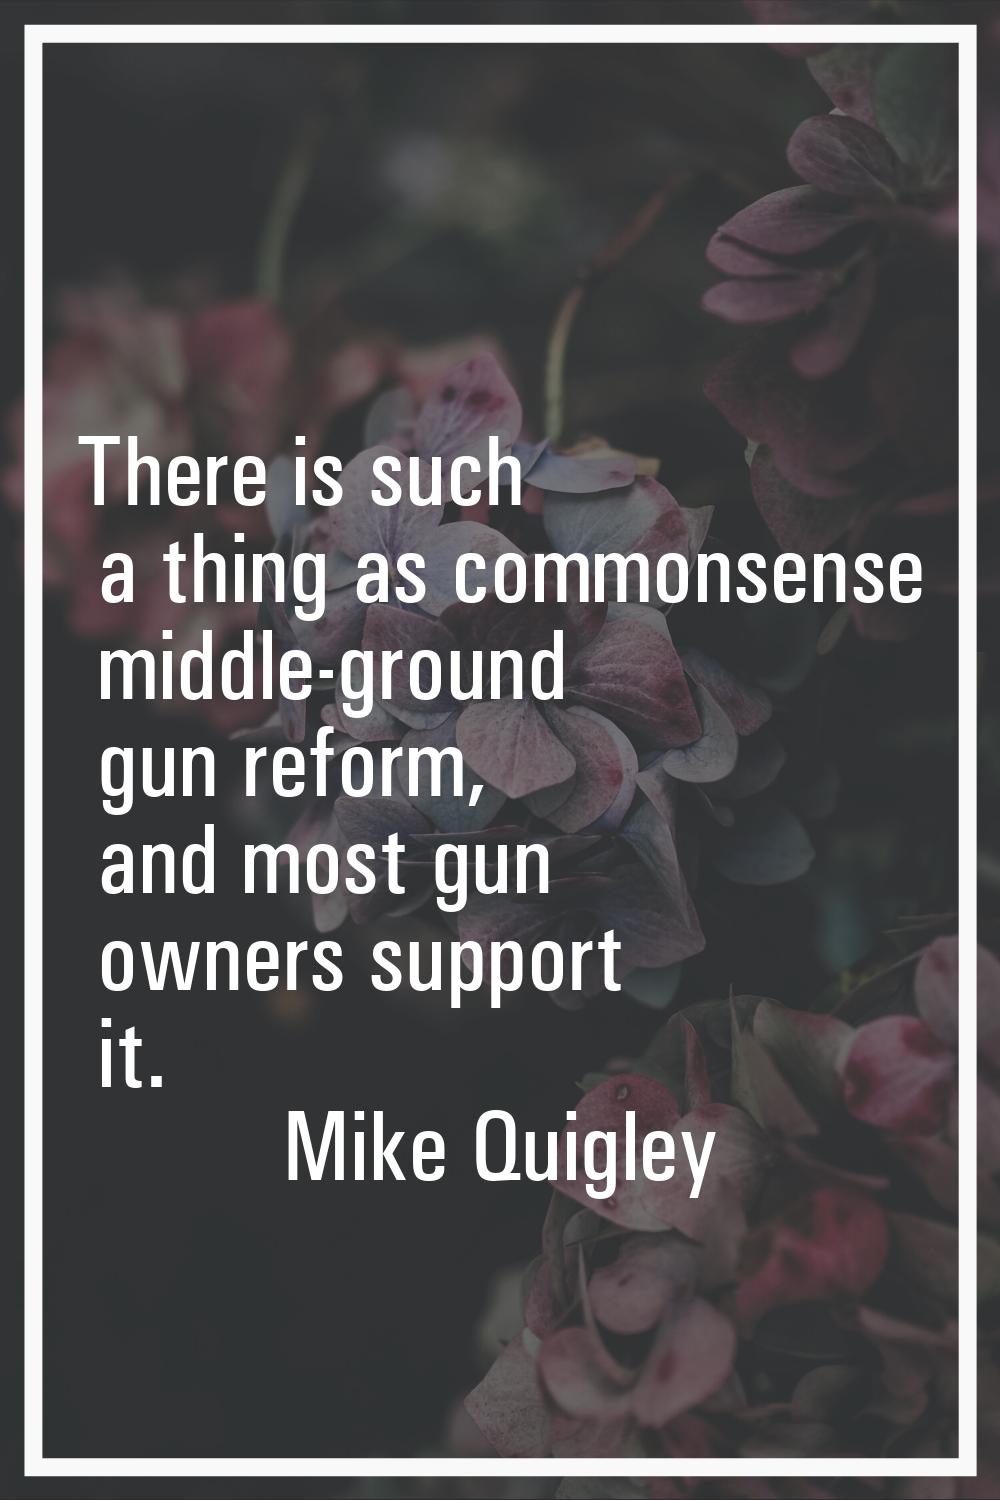 There is such a thing as commonsense middle-ground gun reform, and most gun owners support it.